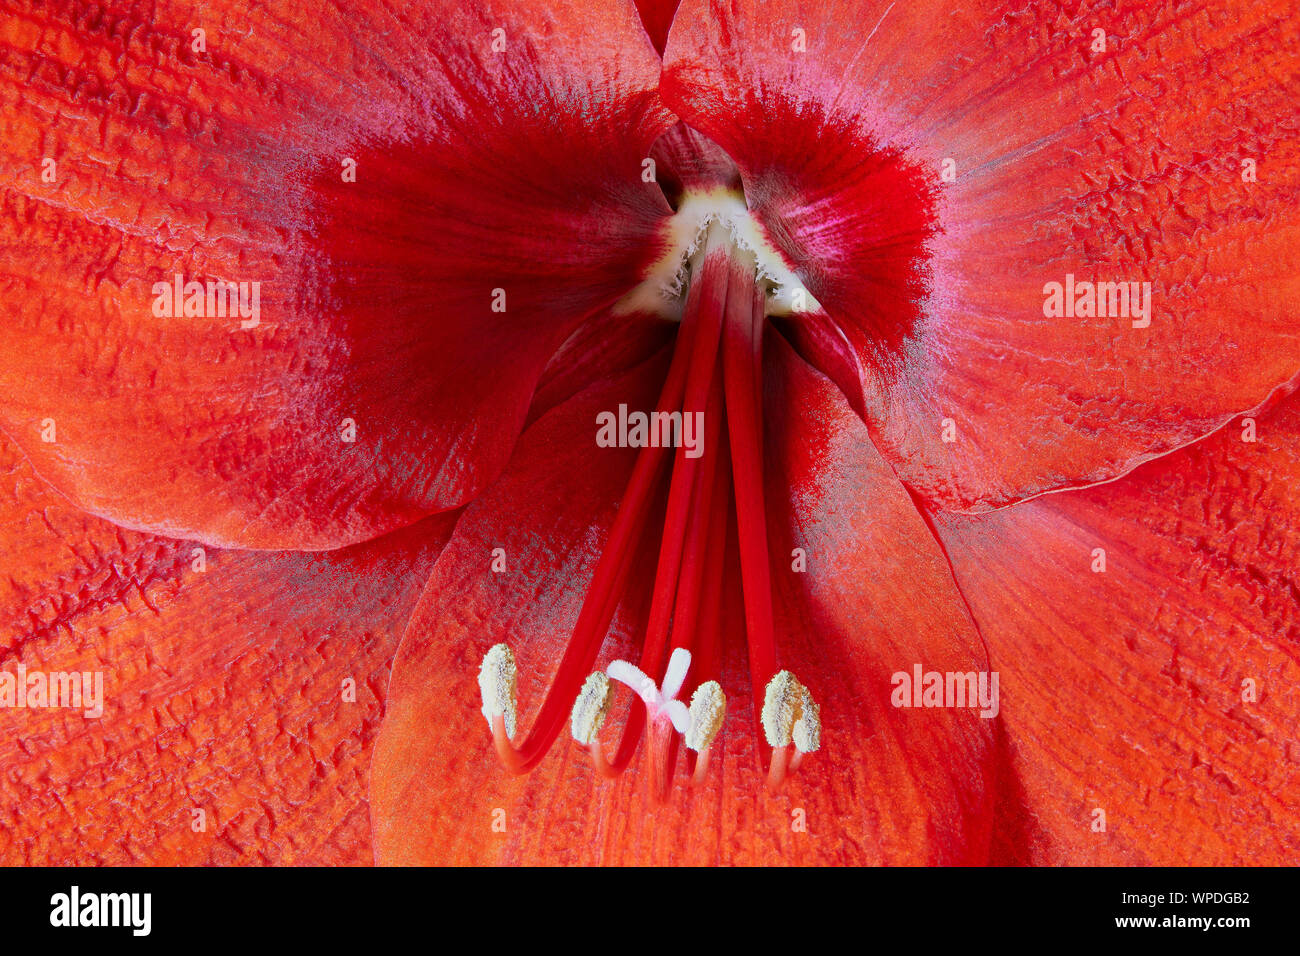 A close up image of Anther, Filament and petals of a red Amaryllis Stock Photo